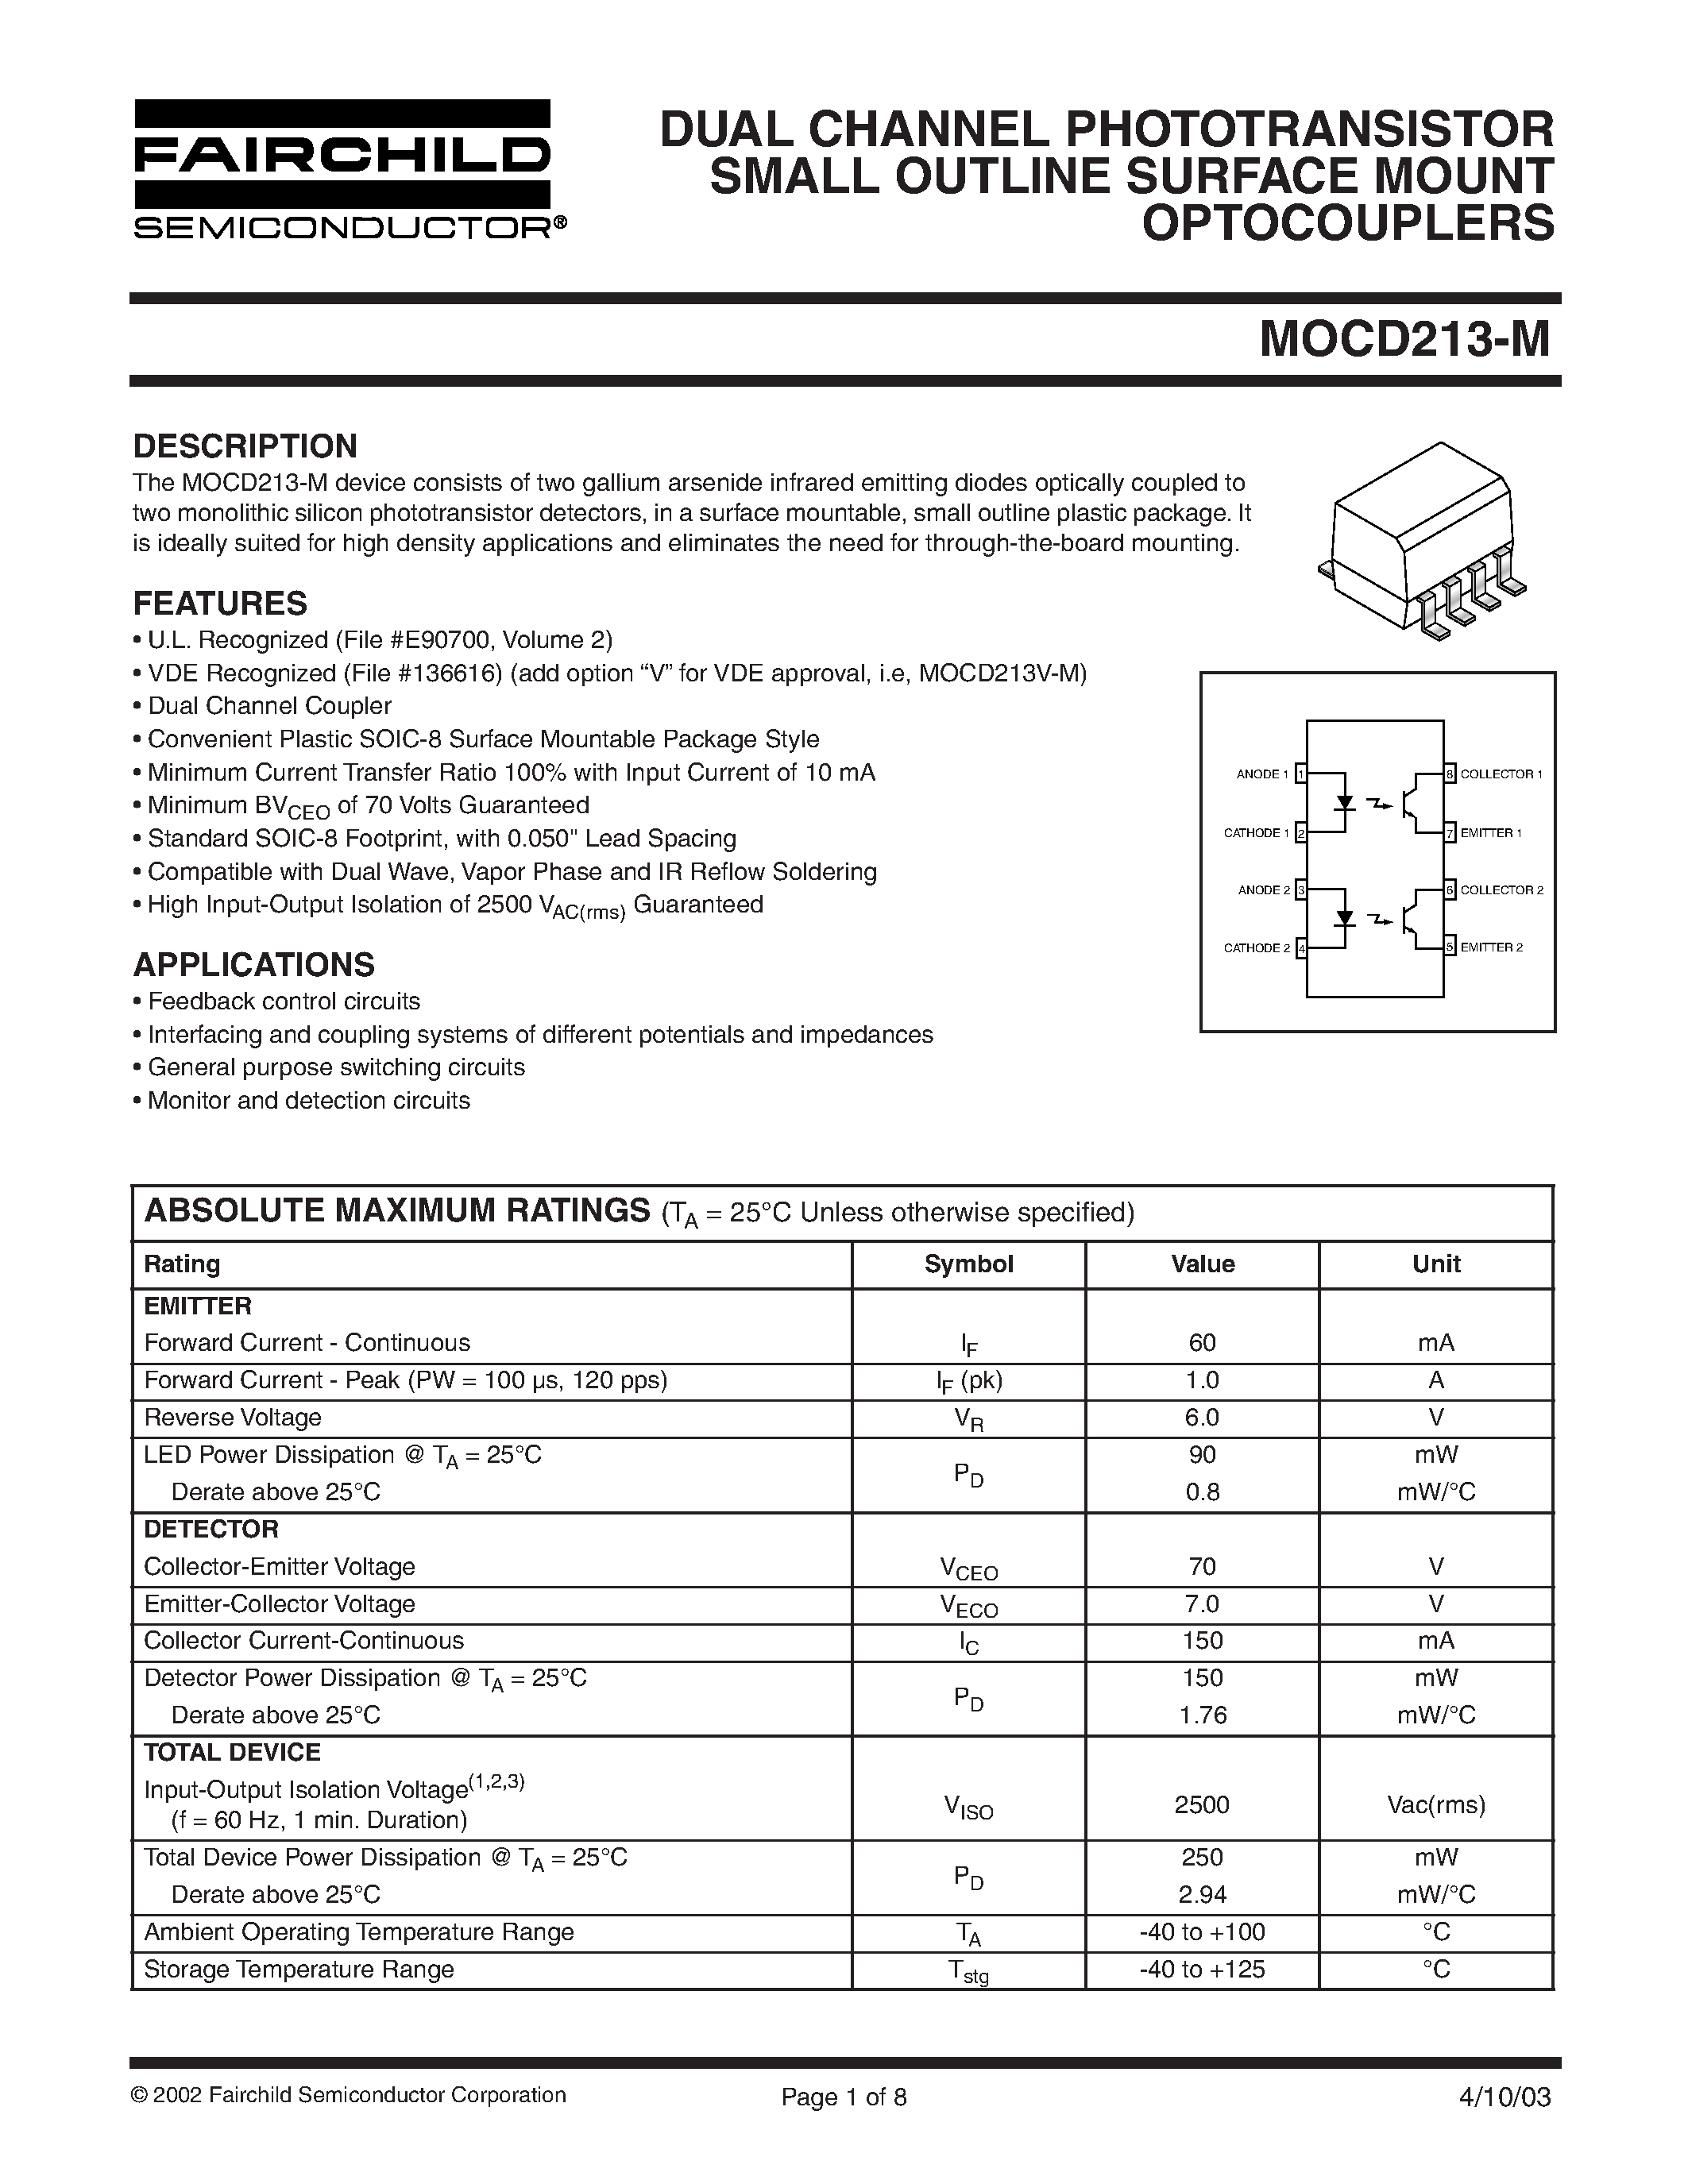 Даташит MOCD213-M - DUAL CHANNEL PHOTOTRANSISTOR SMALL OUTLINE SURFACE MOUNT OPTOCOUPLERS страница 1